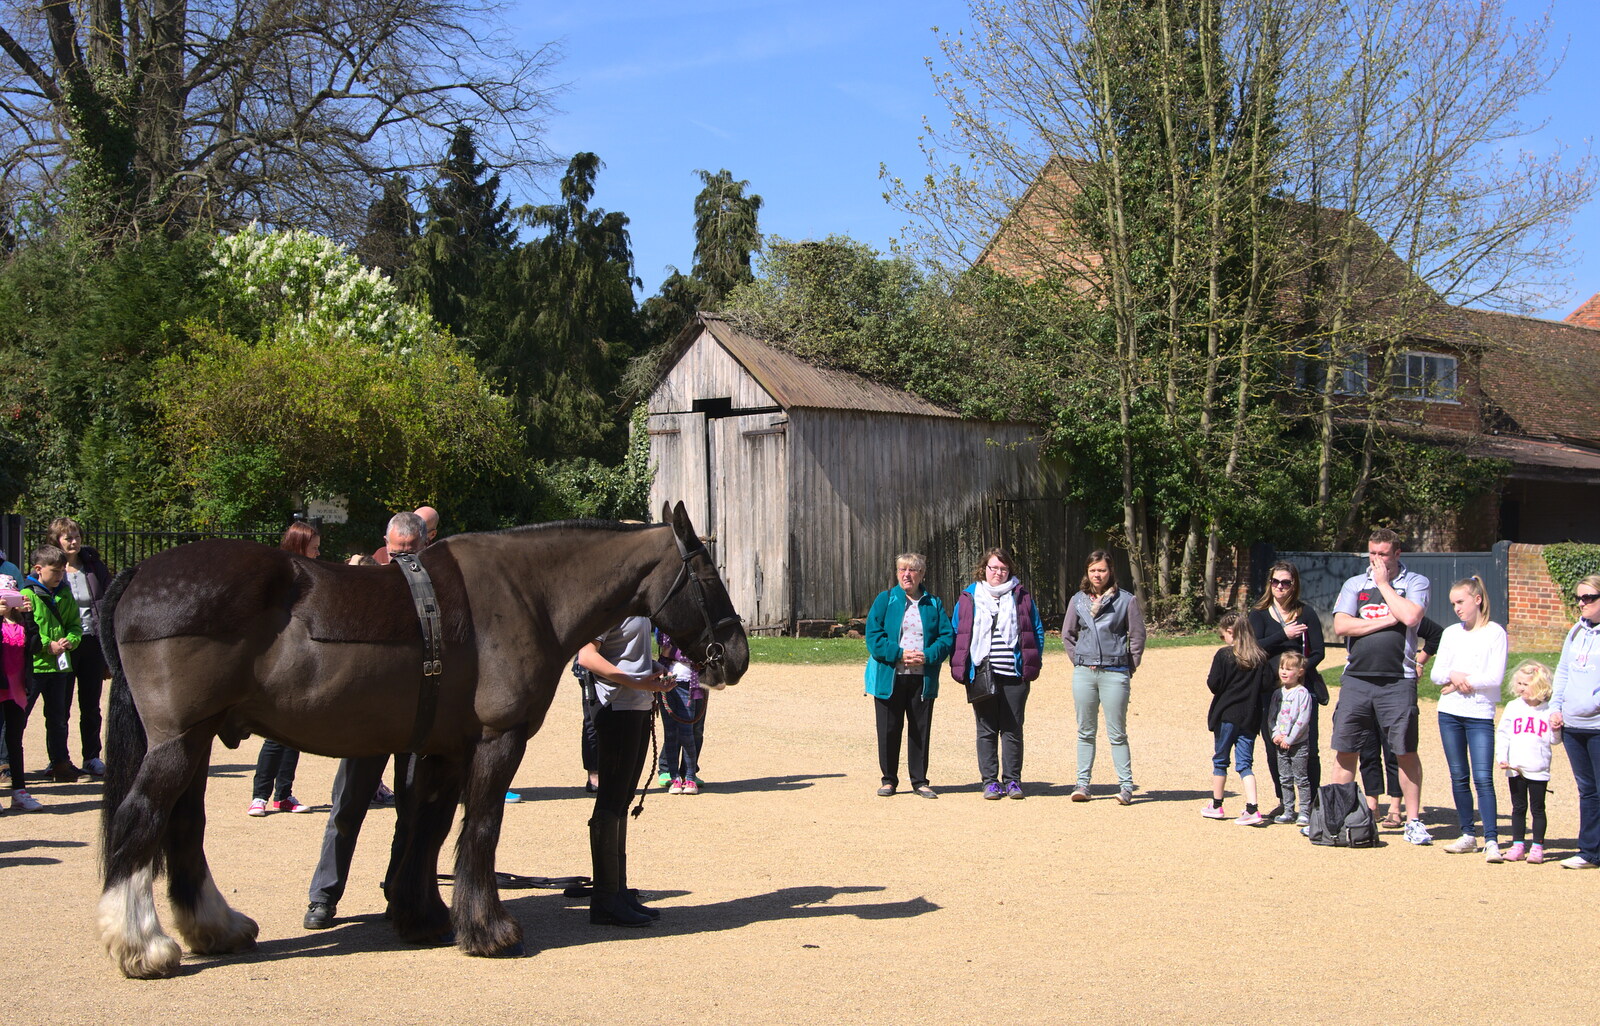 Bob the heavy horse comes out for a show from A Trip to Audley End House, Saffron Walden, Essex - 16th April 2014